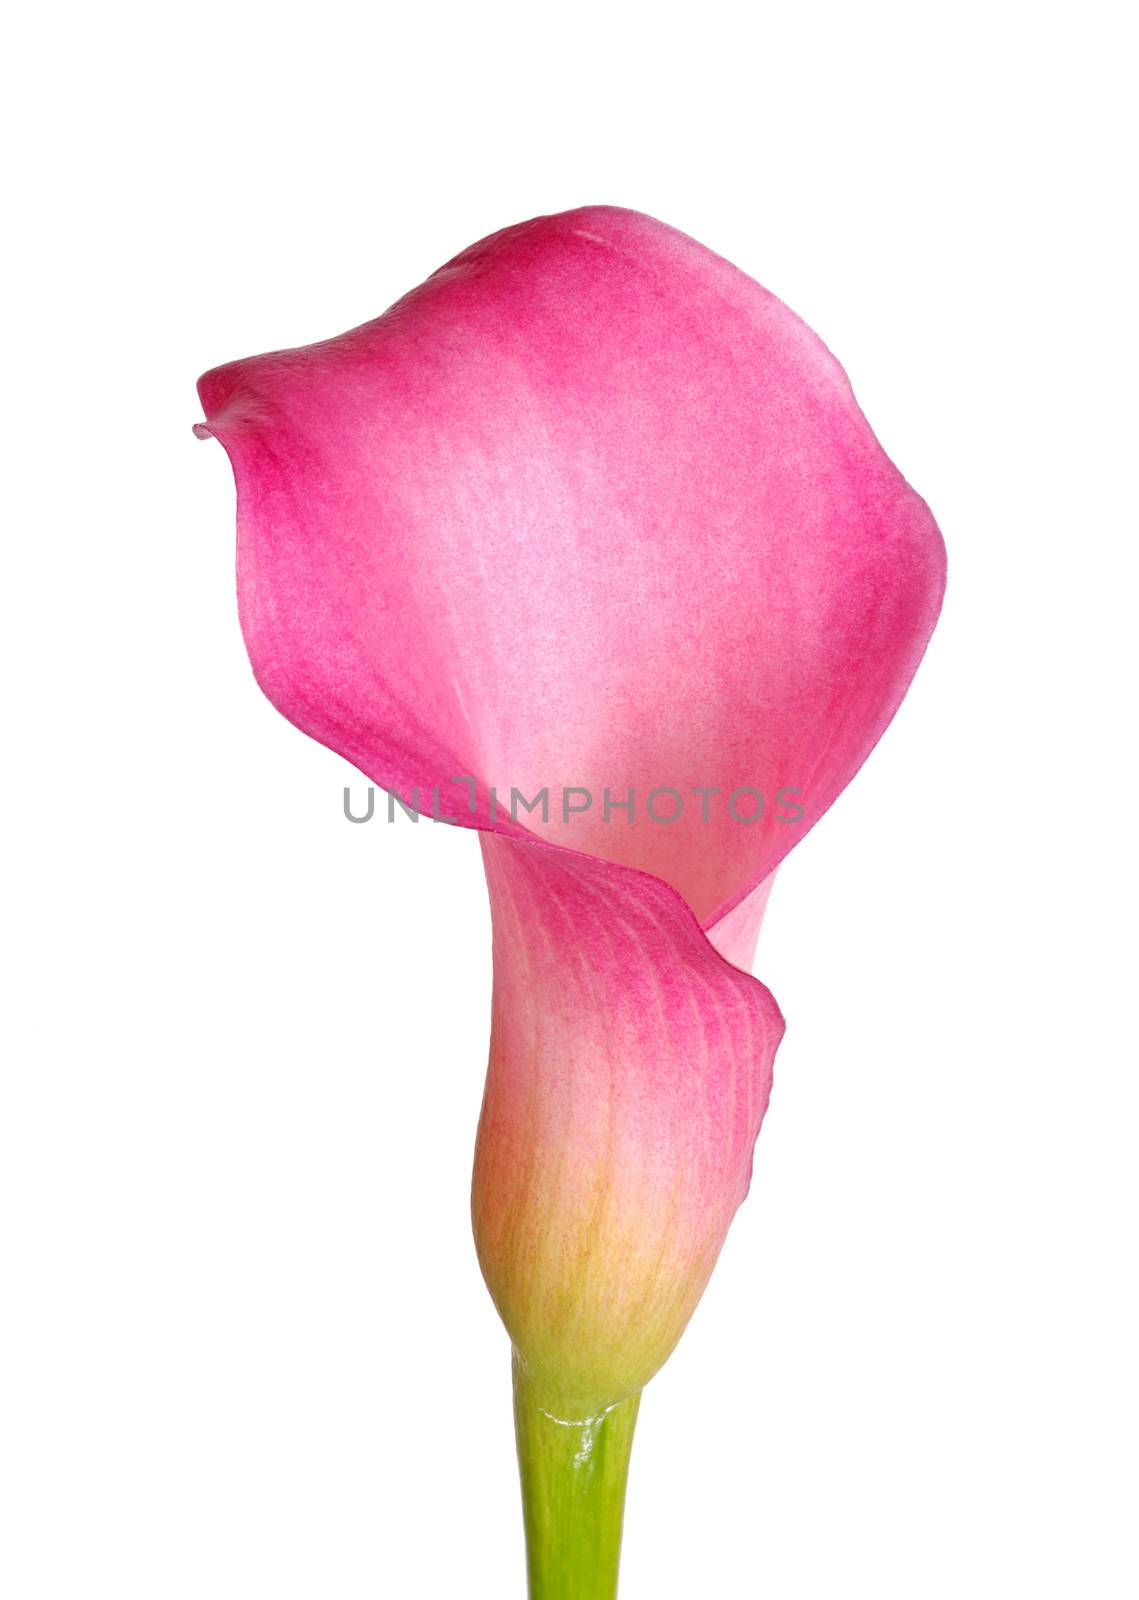 Single flower of a pink calla lily by sgoodwin4813